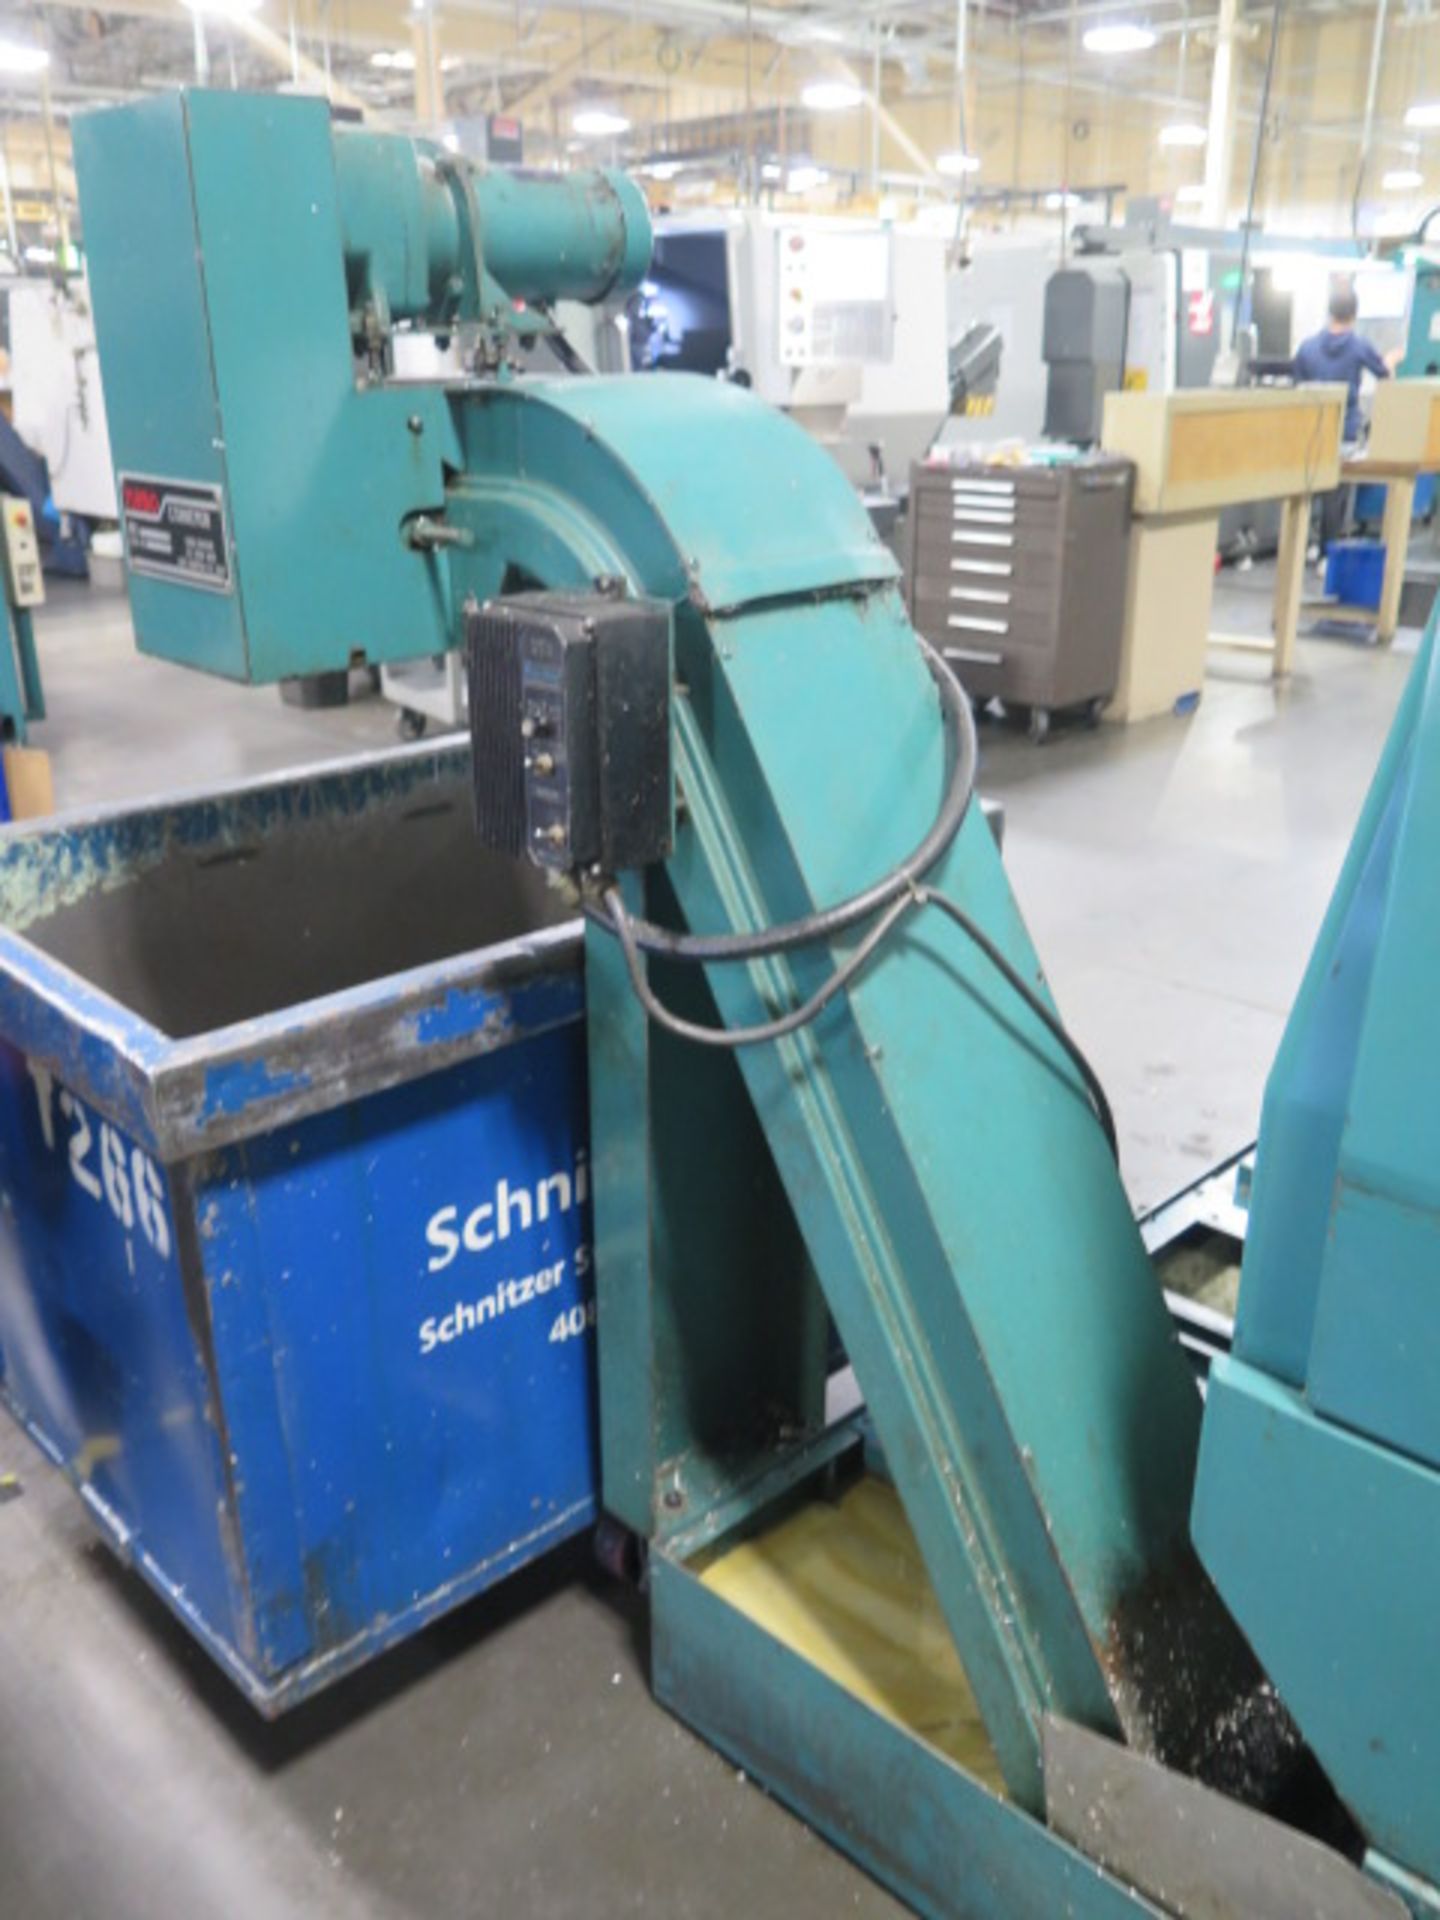 Matsuura RA-3F 2-Pallet CNC Vertical Machining Center s/n 950711554 w/ Yasnac i-80 Controls, Hand Wh - Image 17 of 22